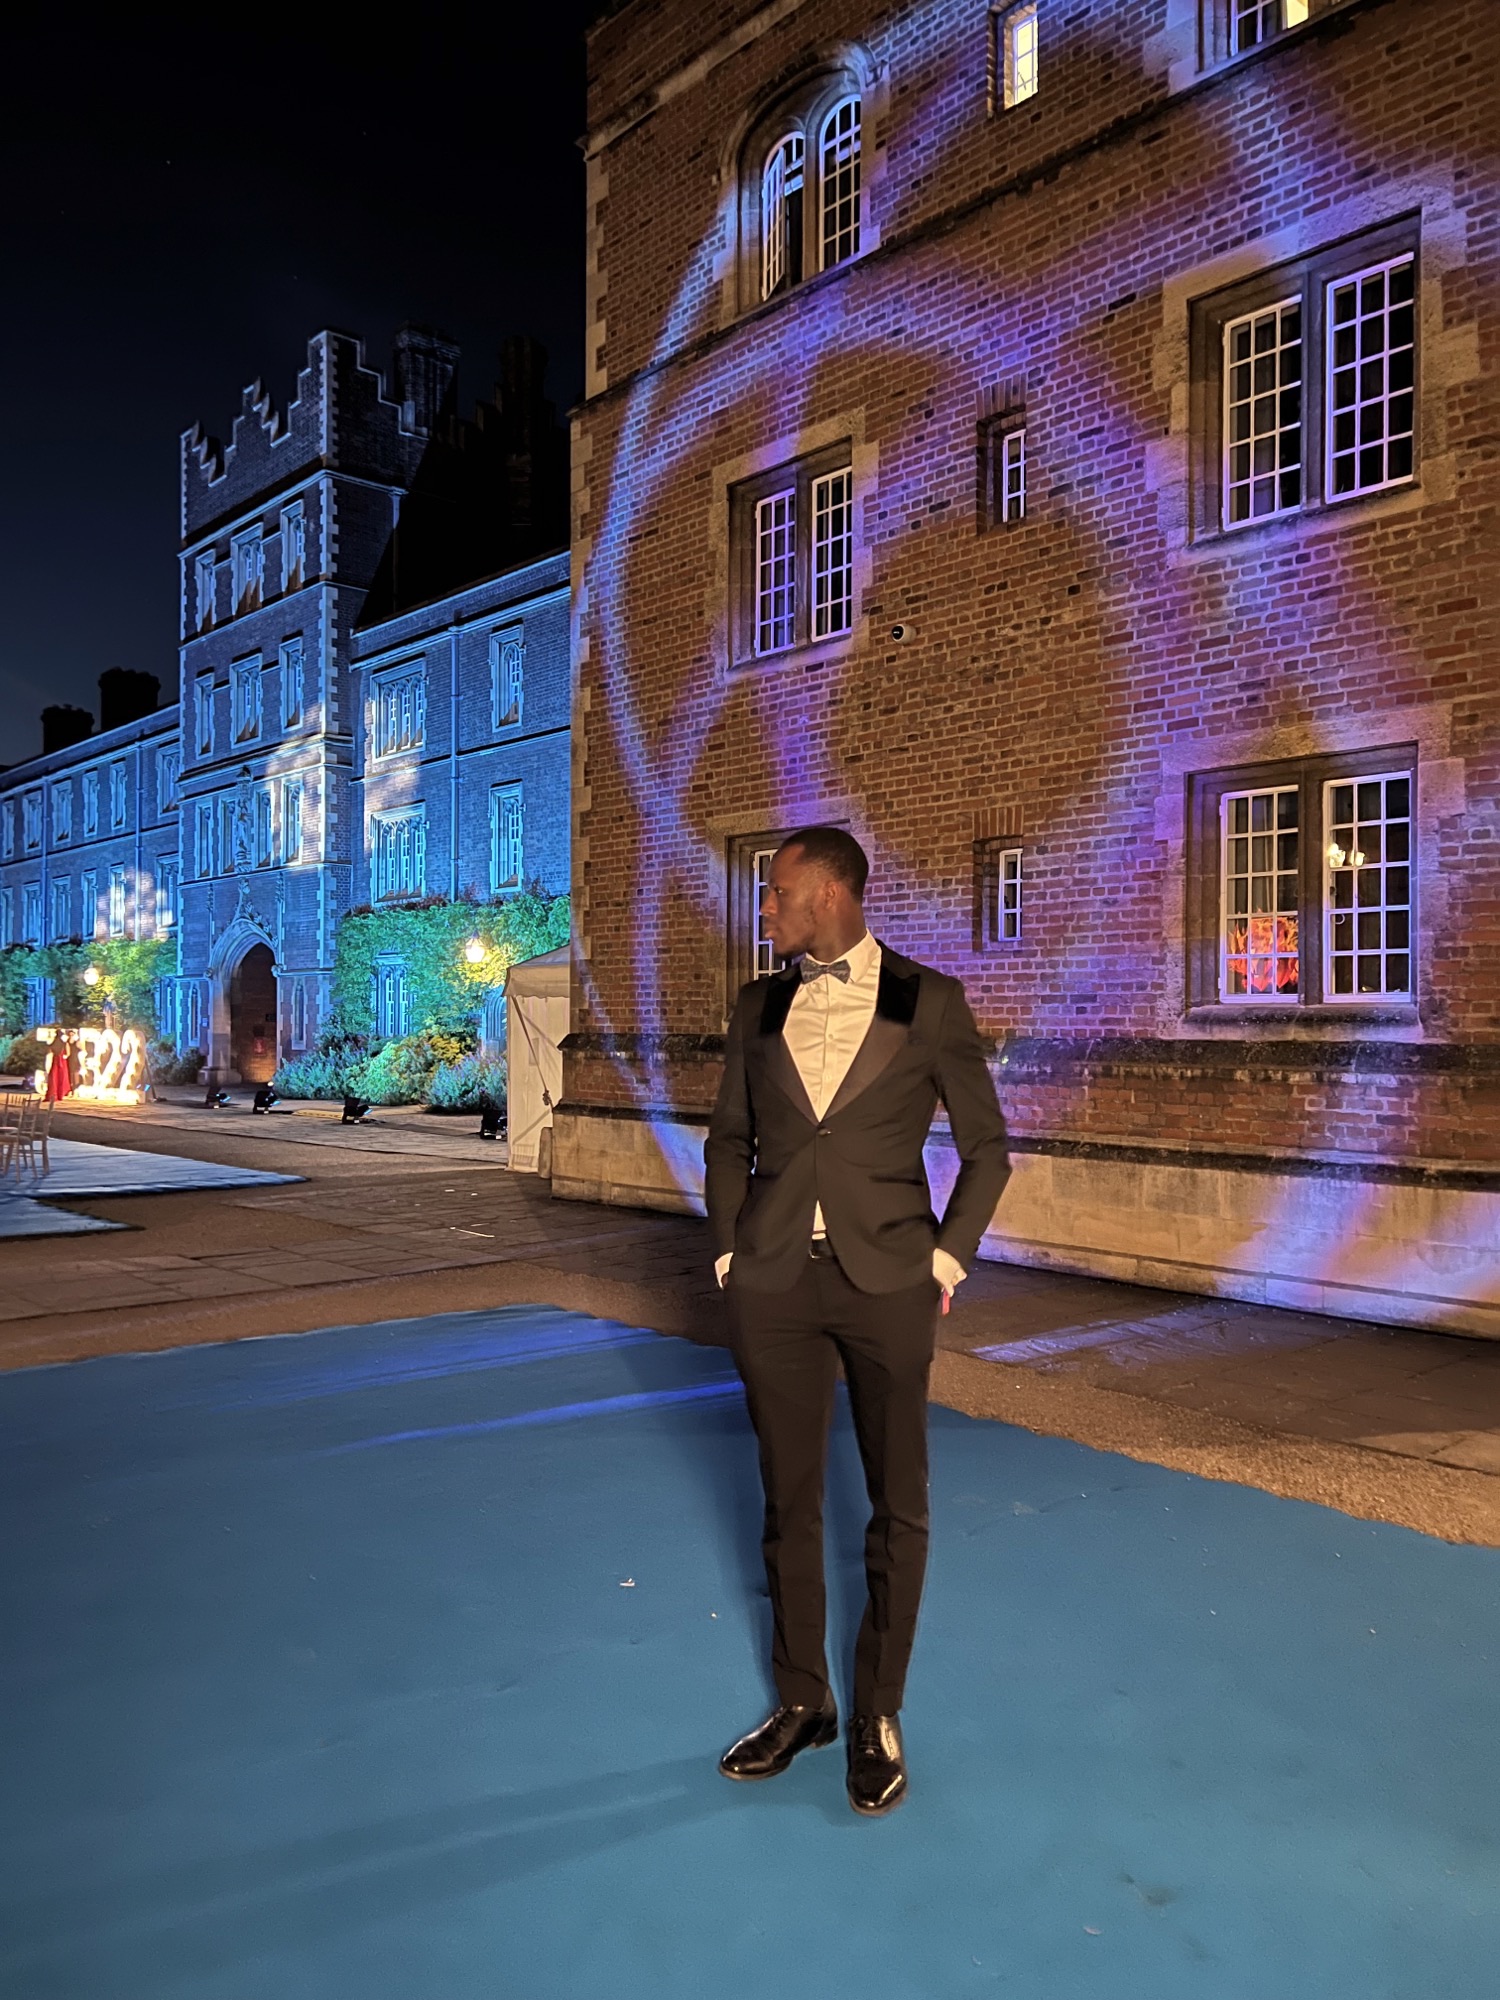 Ayo standing in front of a buiding with coloured lights projecting onto it, in formal dress